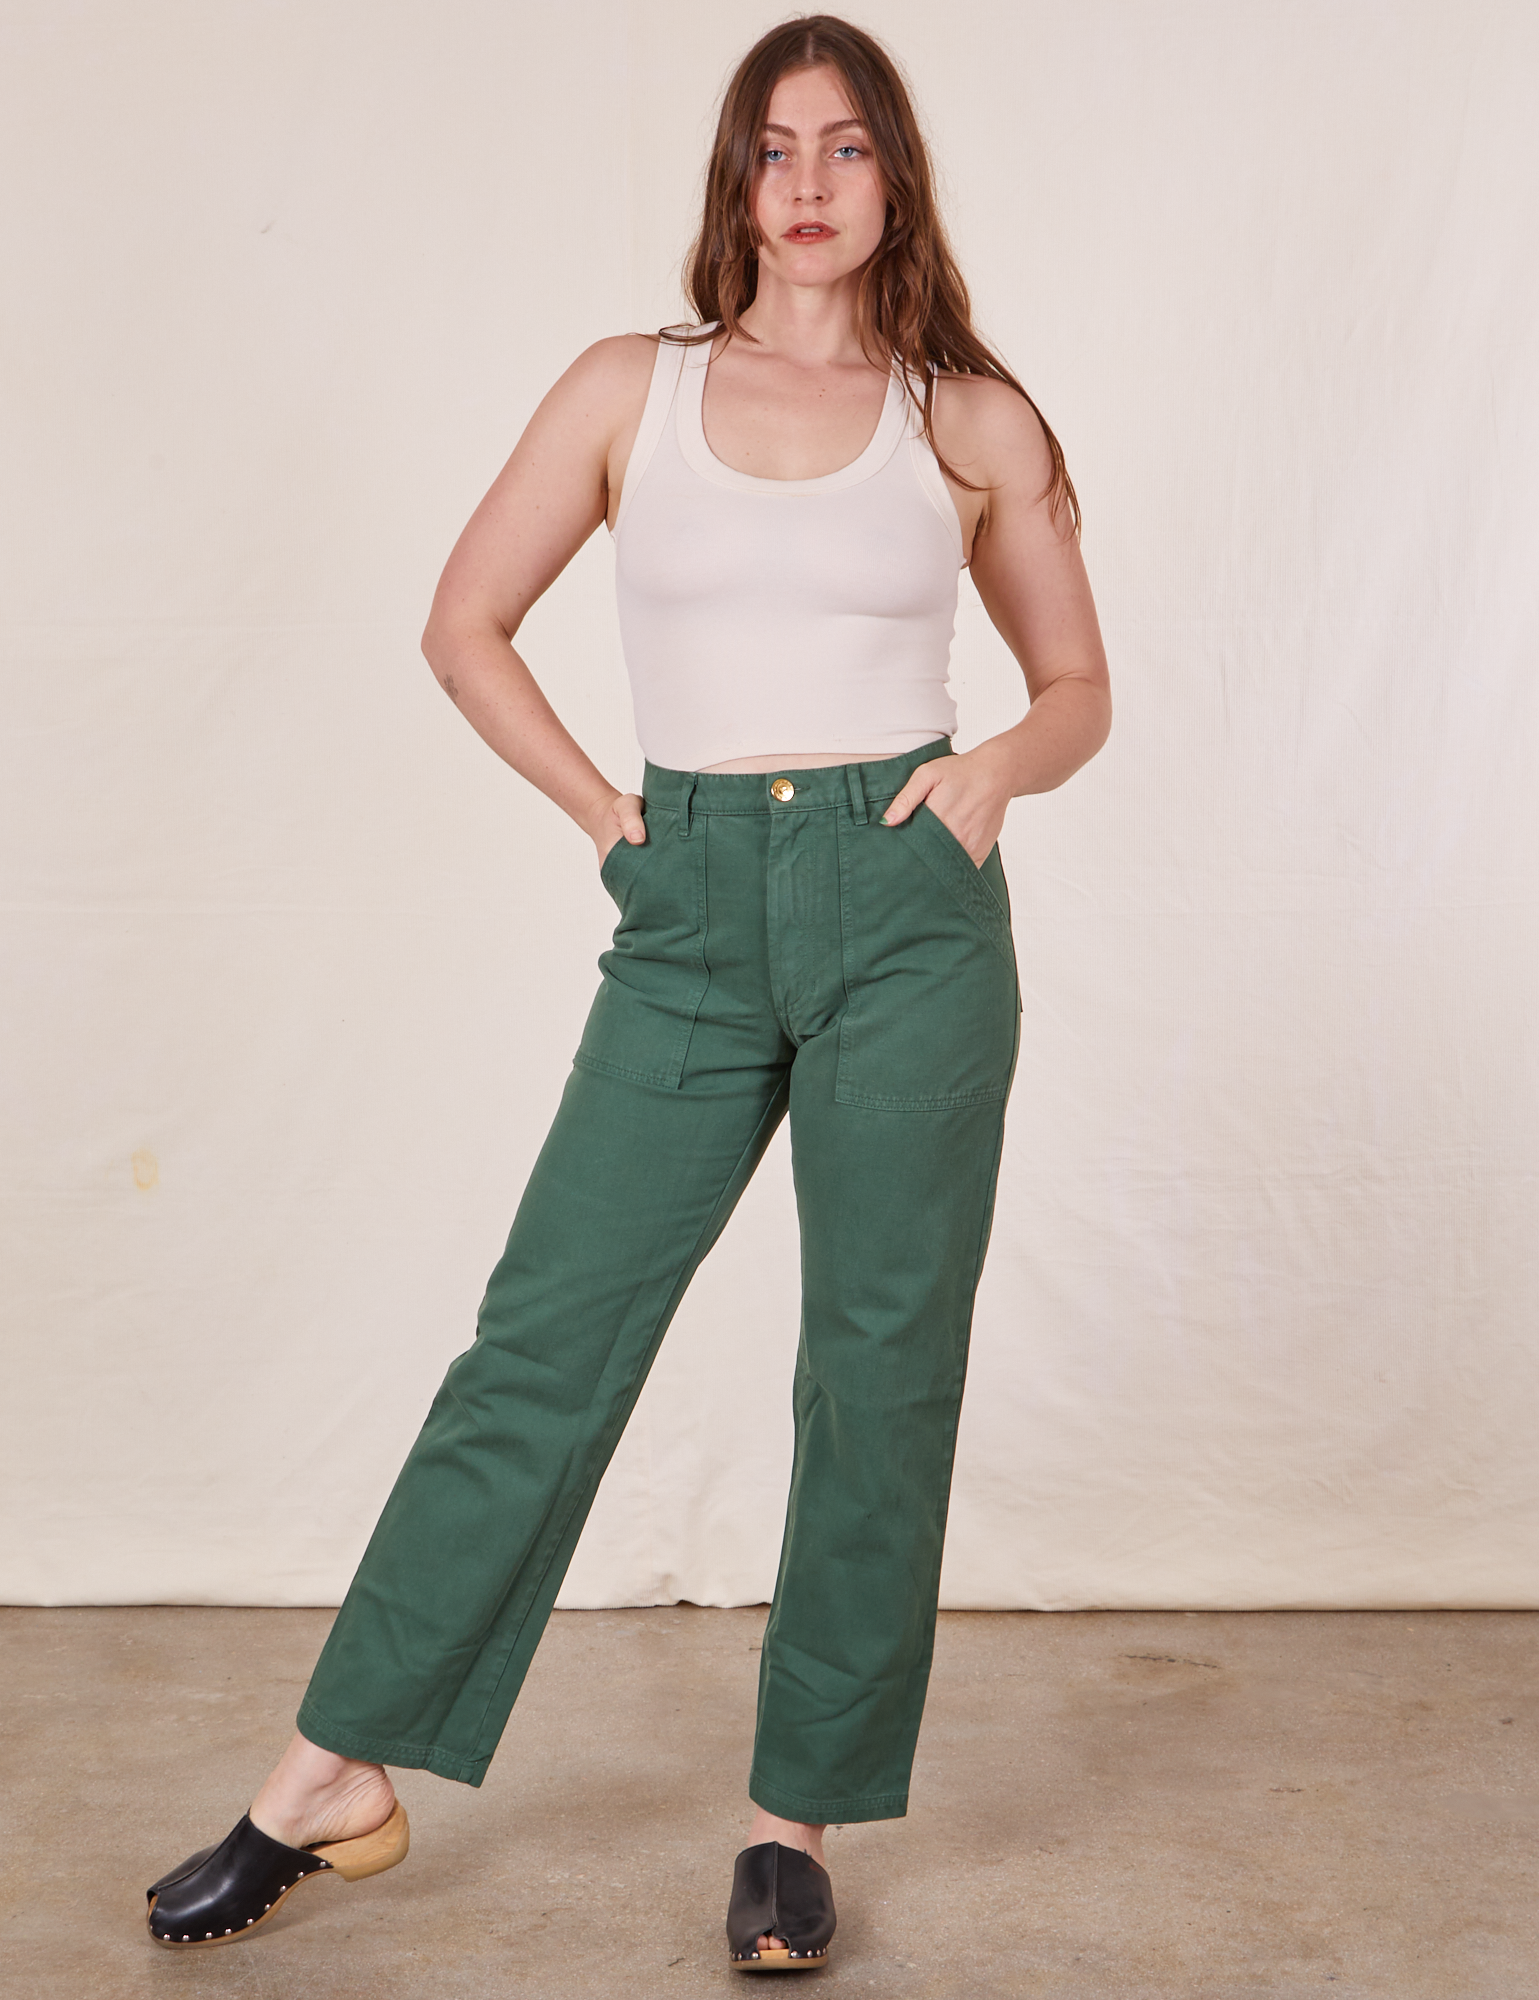 Allison is 5&#39;10&quot; and wearing Long S Work Pants in Dark Emerald Green paired with vintage off-white Tank Top